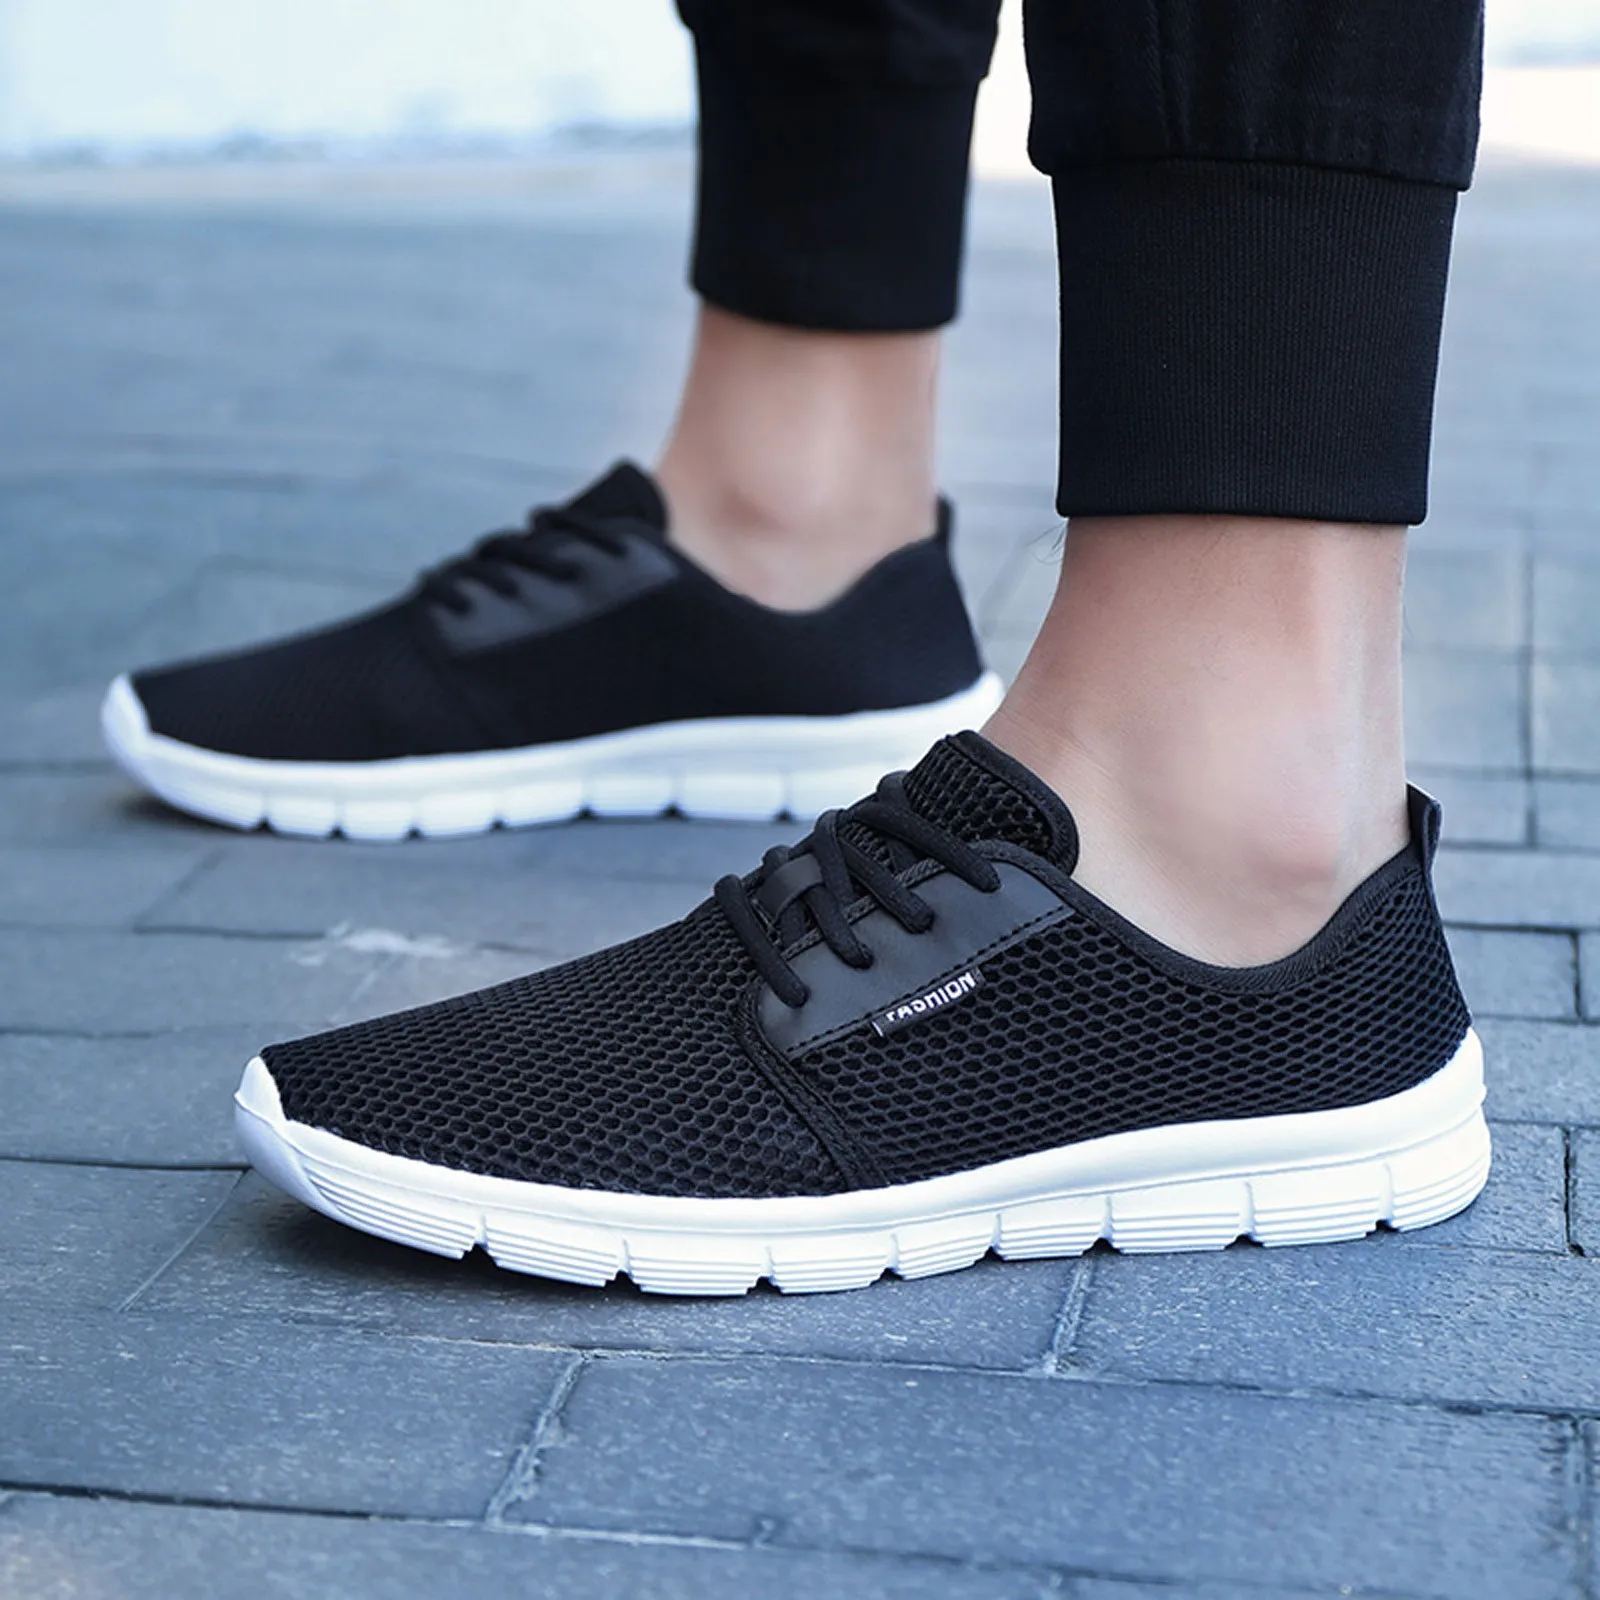 2021 Mesh Men's Sneakers Breathable Flat Shoes Lightweight Casual Shoes Ladies Men-up Deportivas Mujer Chaussures Femme